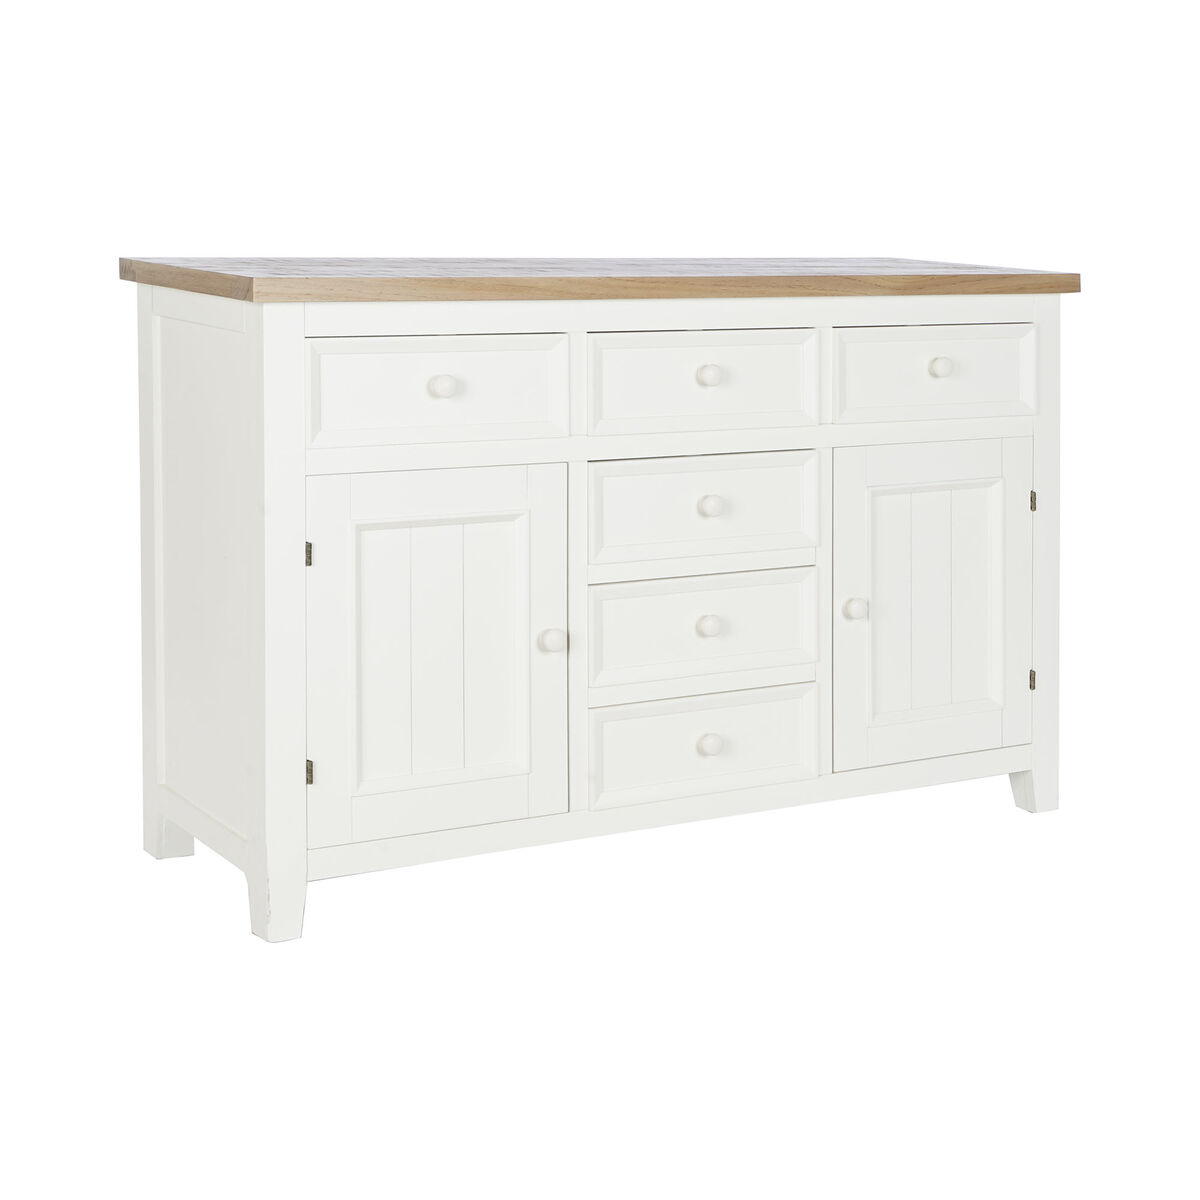 Sideboard DKD Home Decor Beige Natural Paolownia wood 122 x 40 x 77 cm